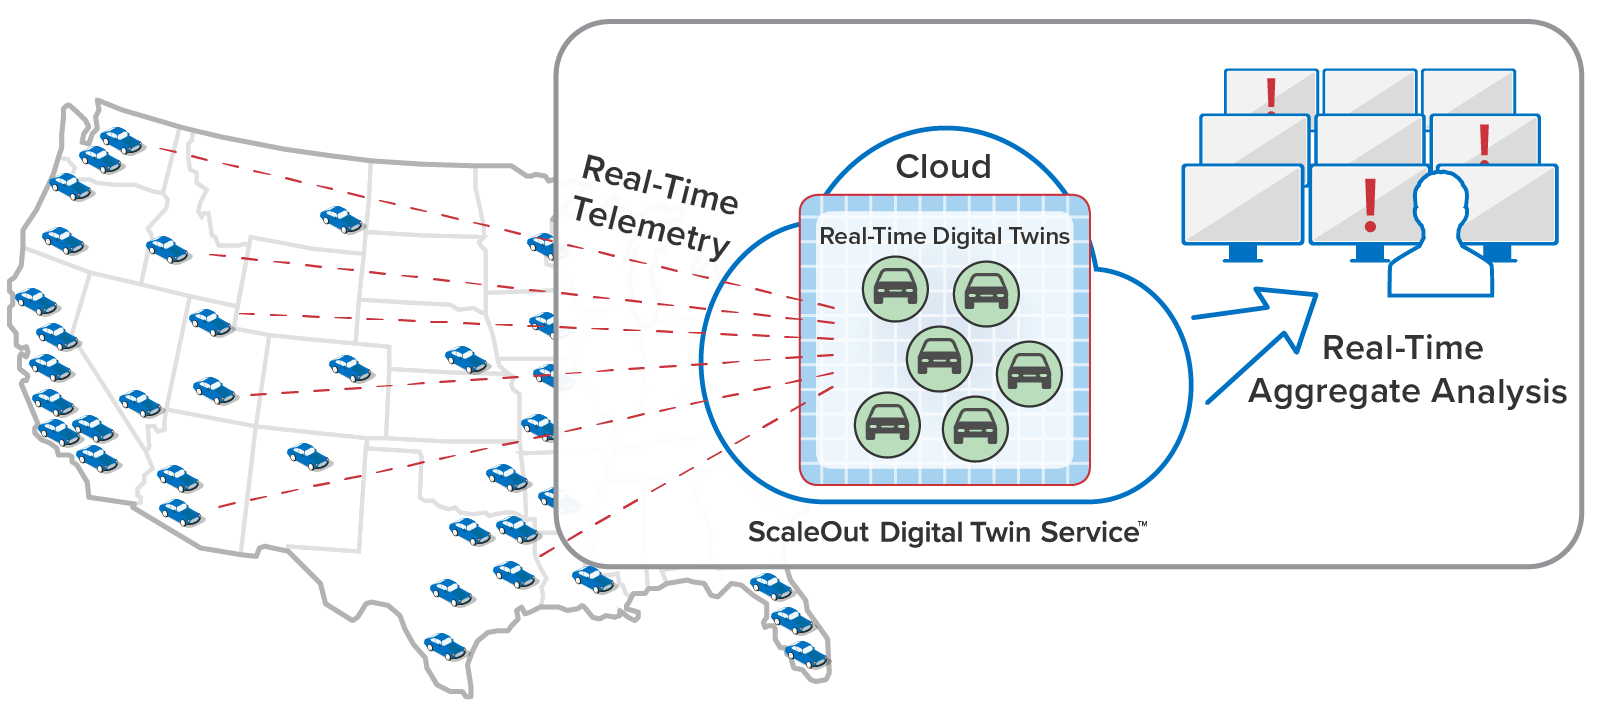 Image showing a fleet of vehicles in the USA. Each vehicle has a corresponding digital twin analyzing telemetry from the vehicle in real time.